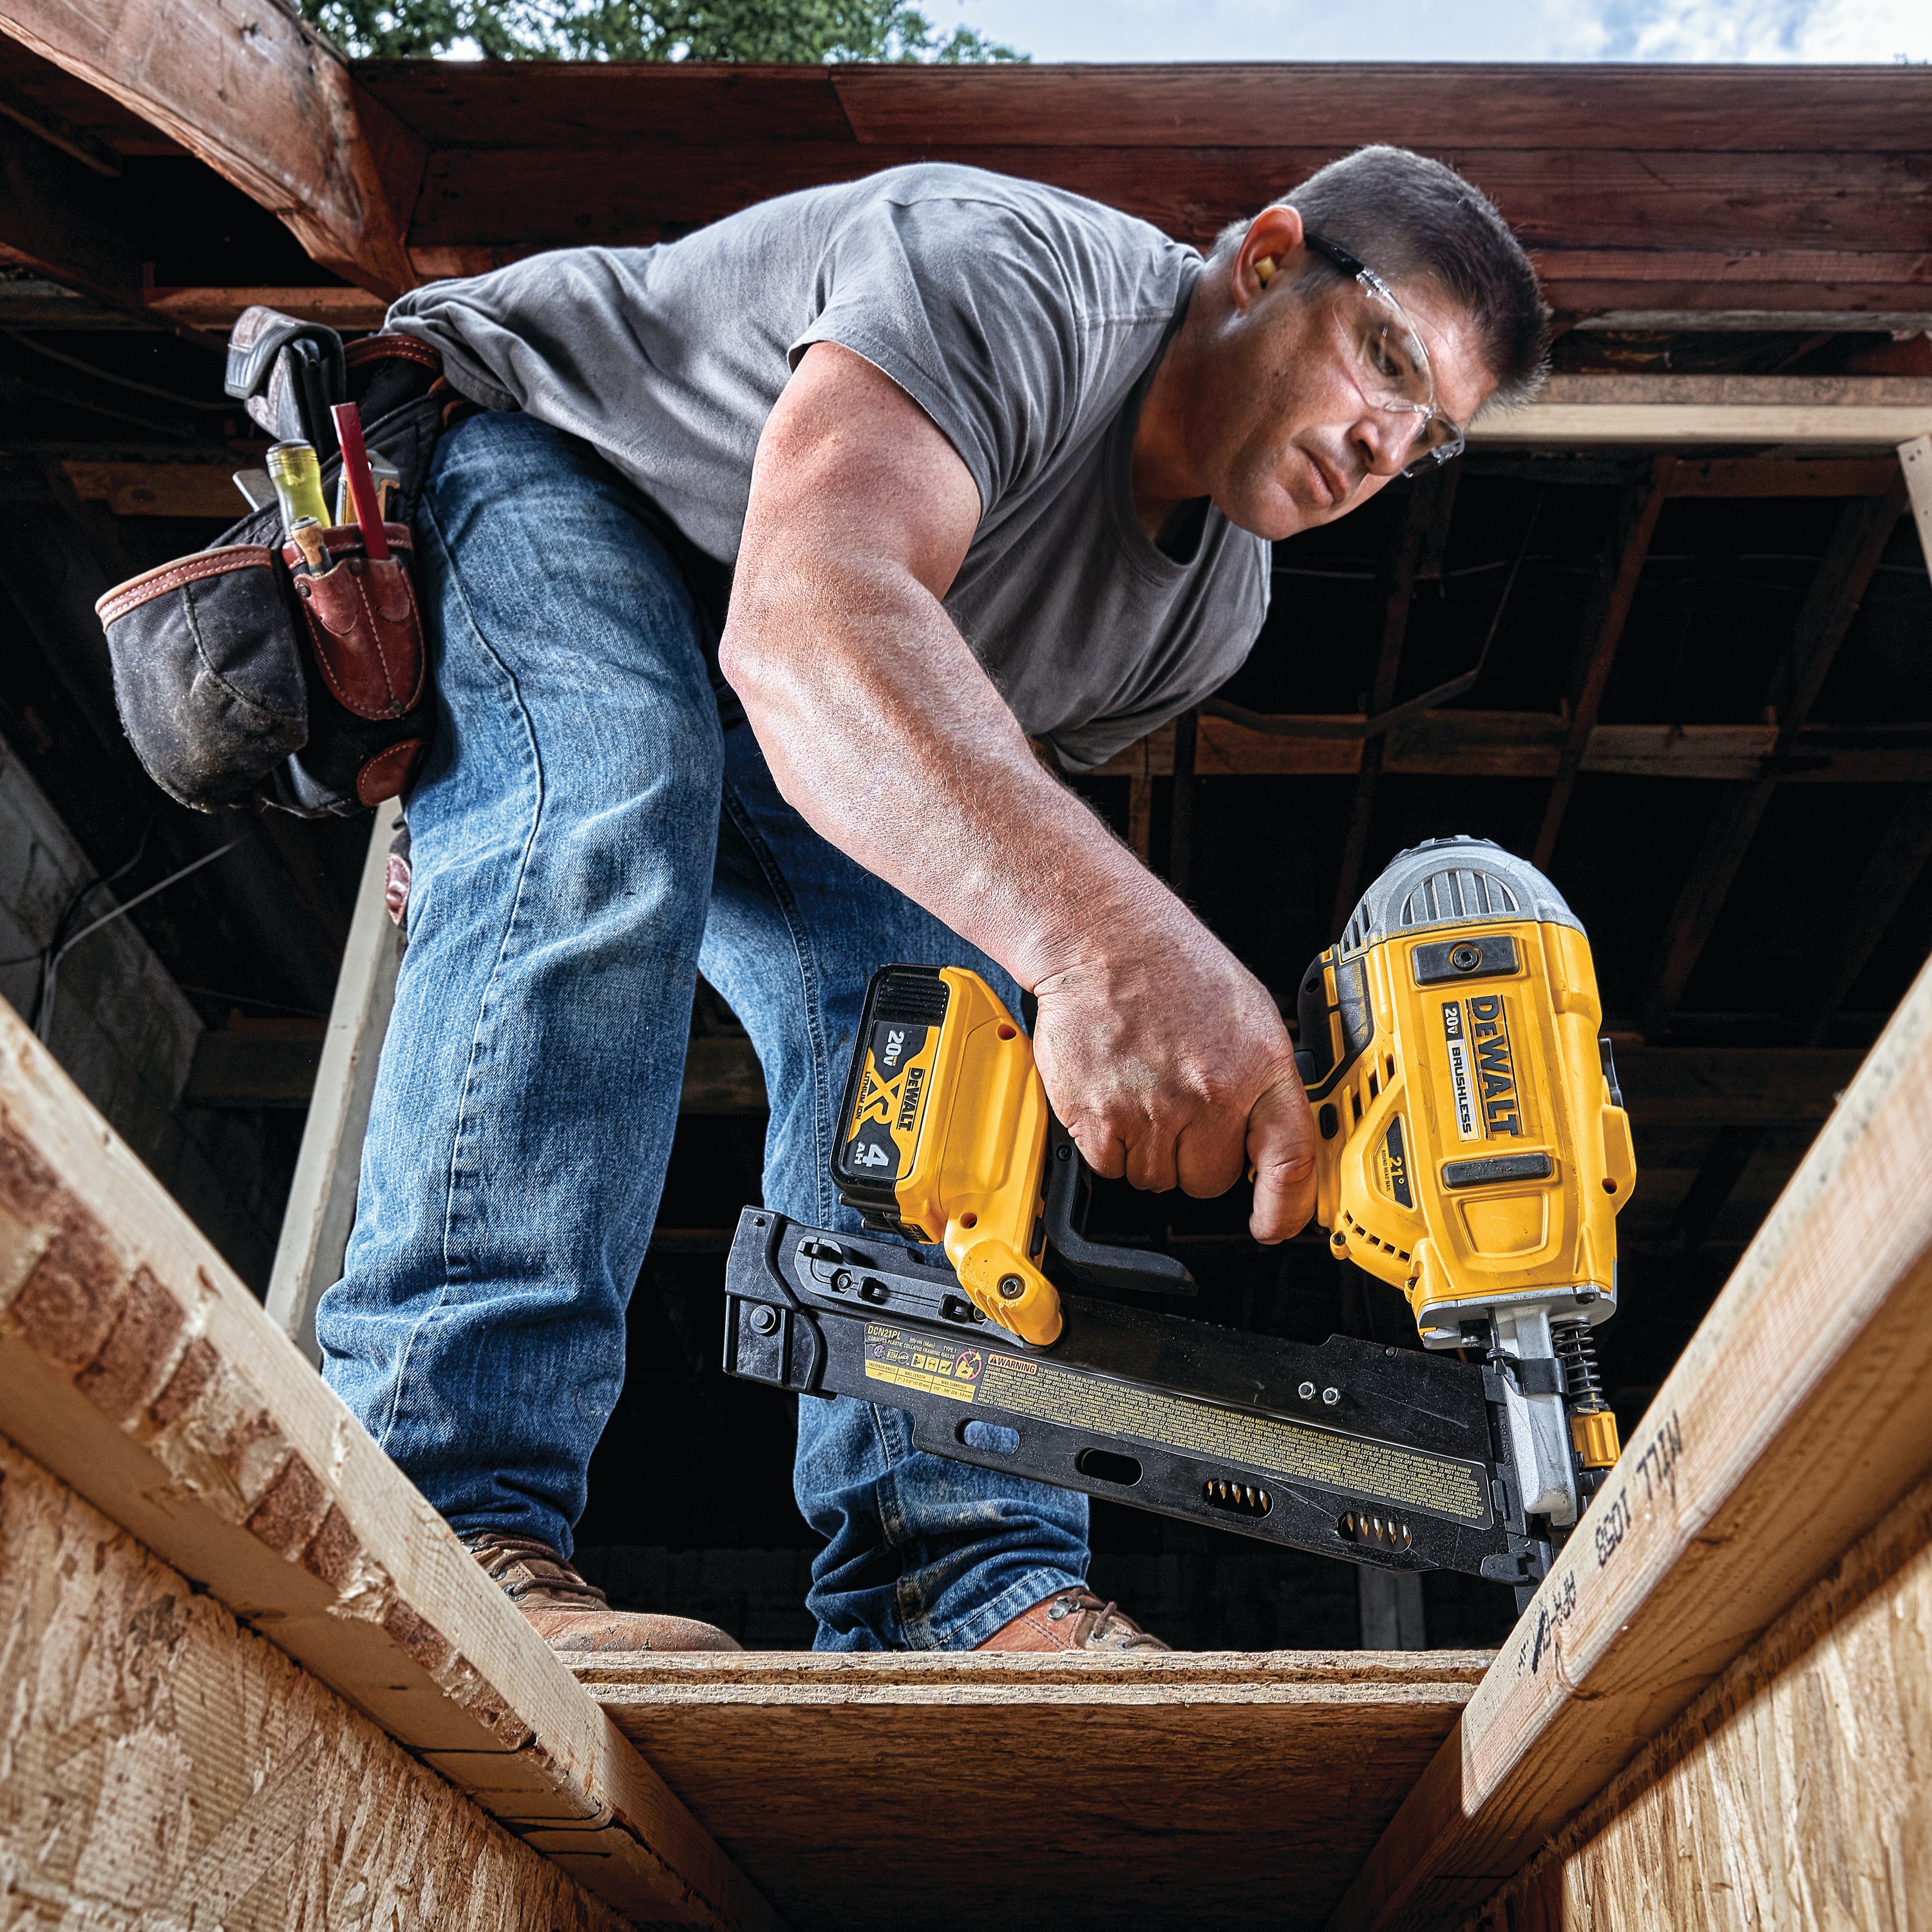 21 inch Plastic Collated Cordless Nailer in action by a constructor worker on a wooden frame